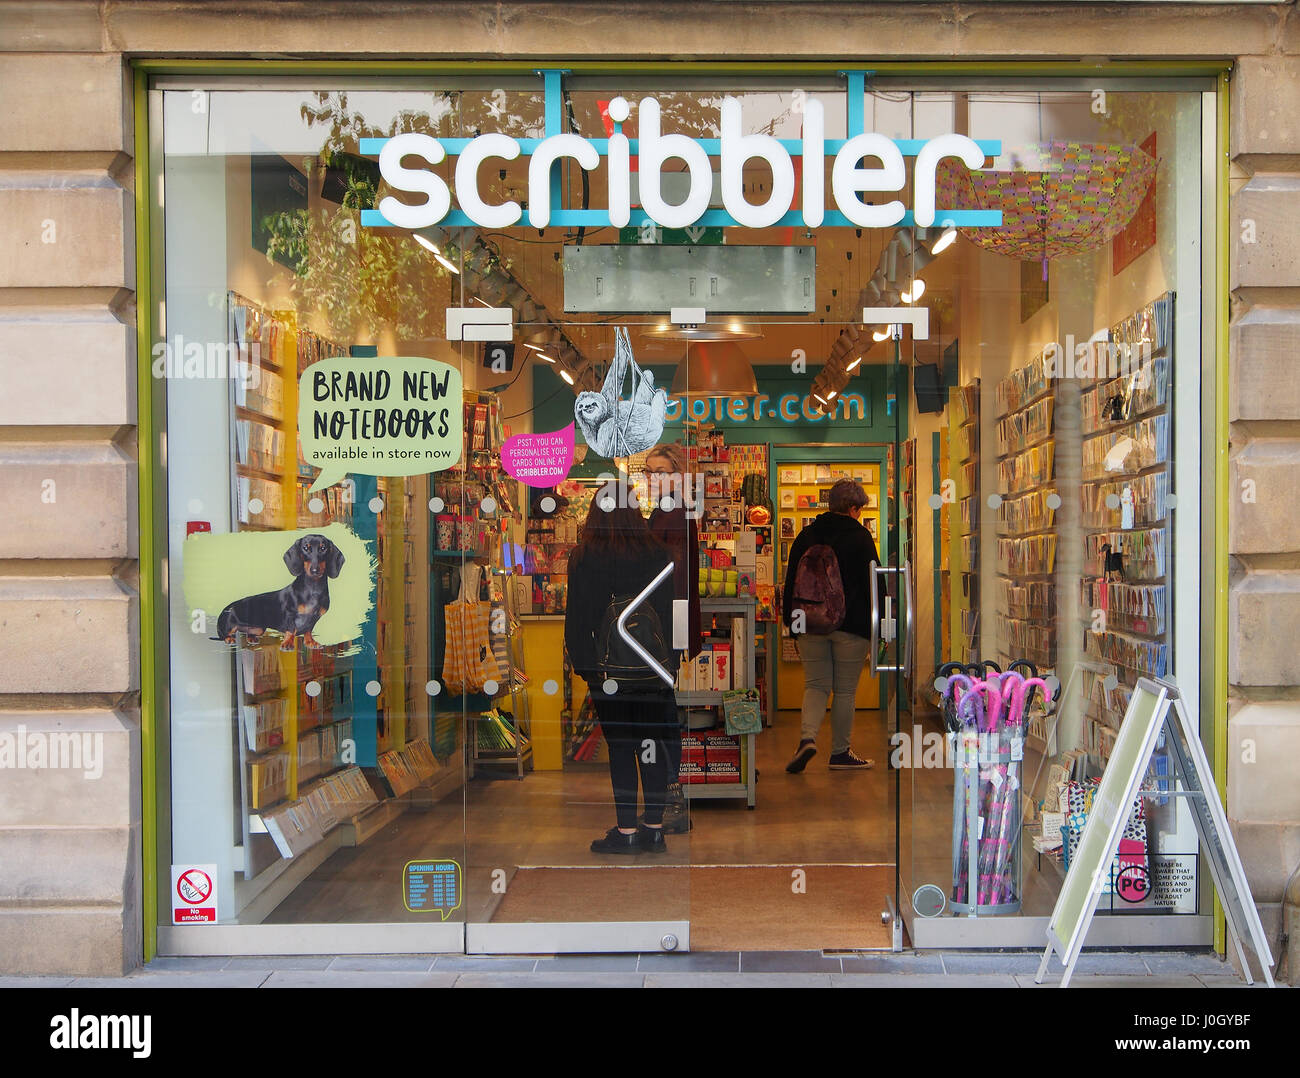 Entrance and window display of Manchester city centre stationary shop Scribbler, showing both the exterior and interior of the store, with customers. Stock Photo